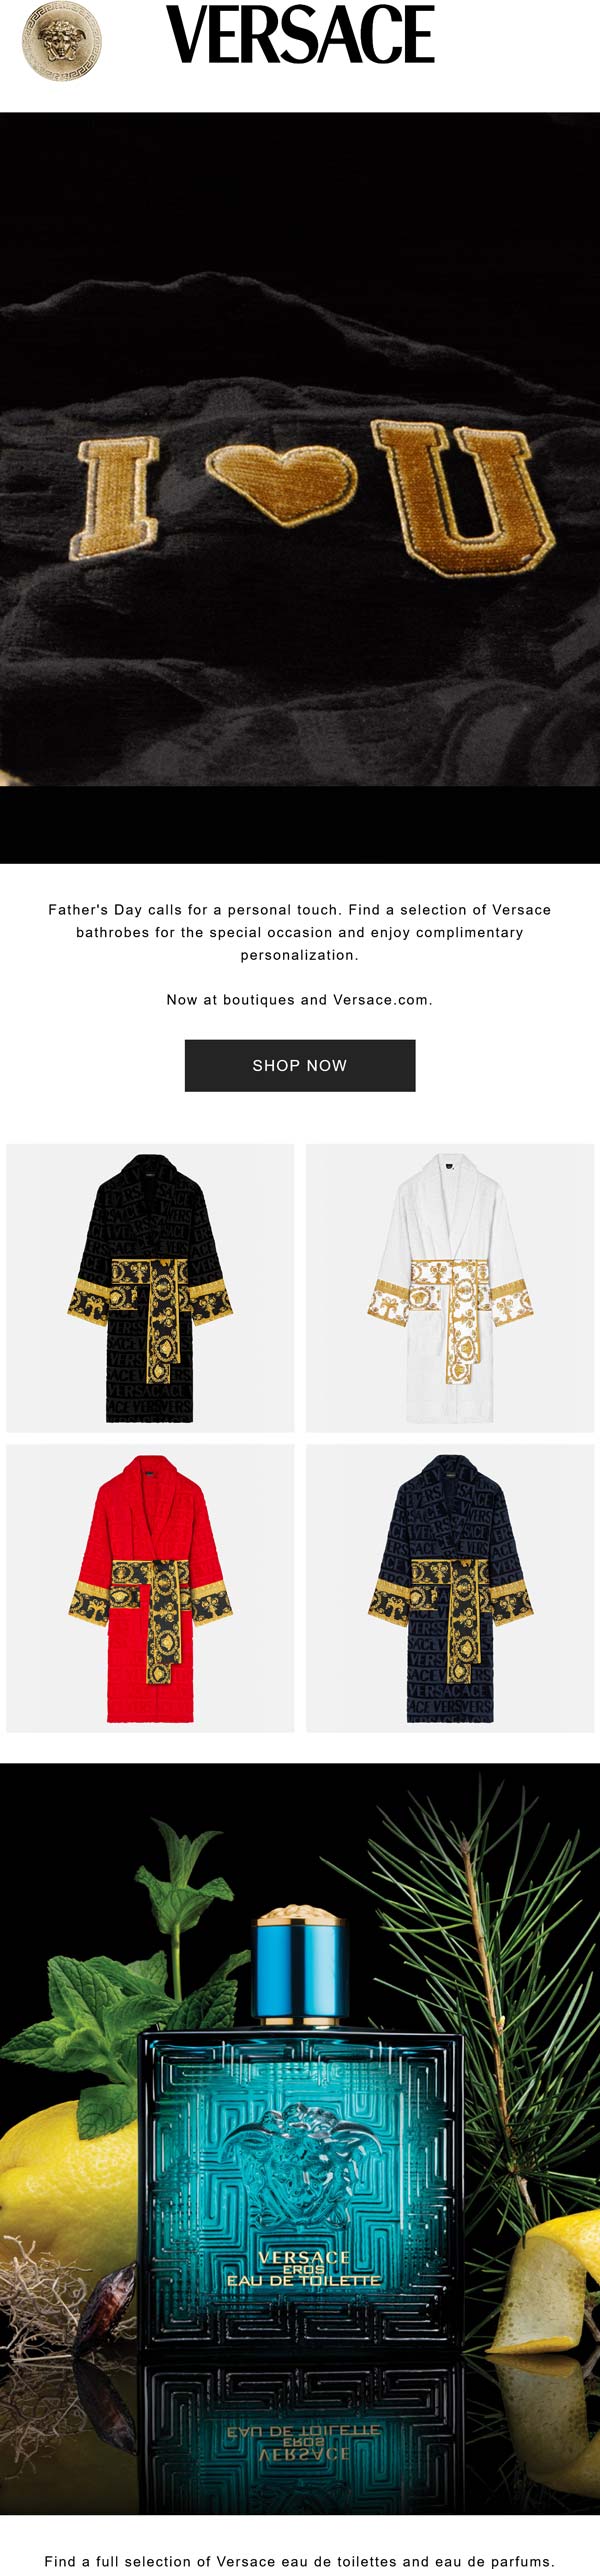 Versace stores Coupon  Free personalization on bathrobes for Dad at Versace, ditto online #versace 